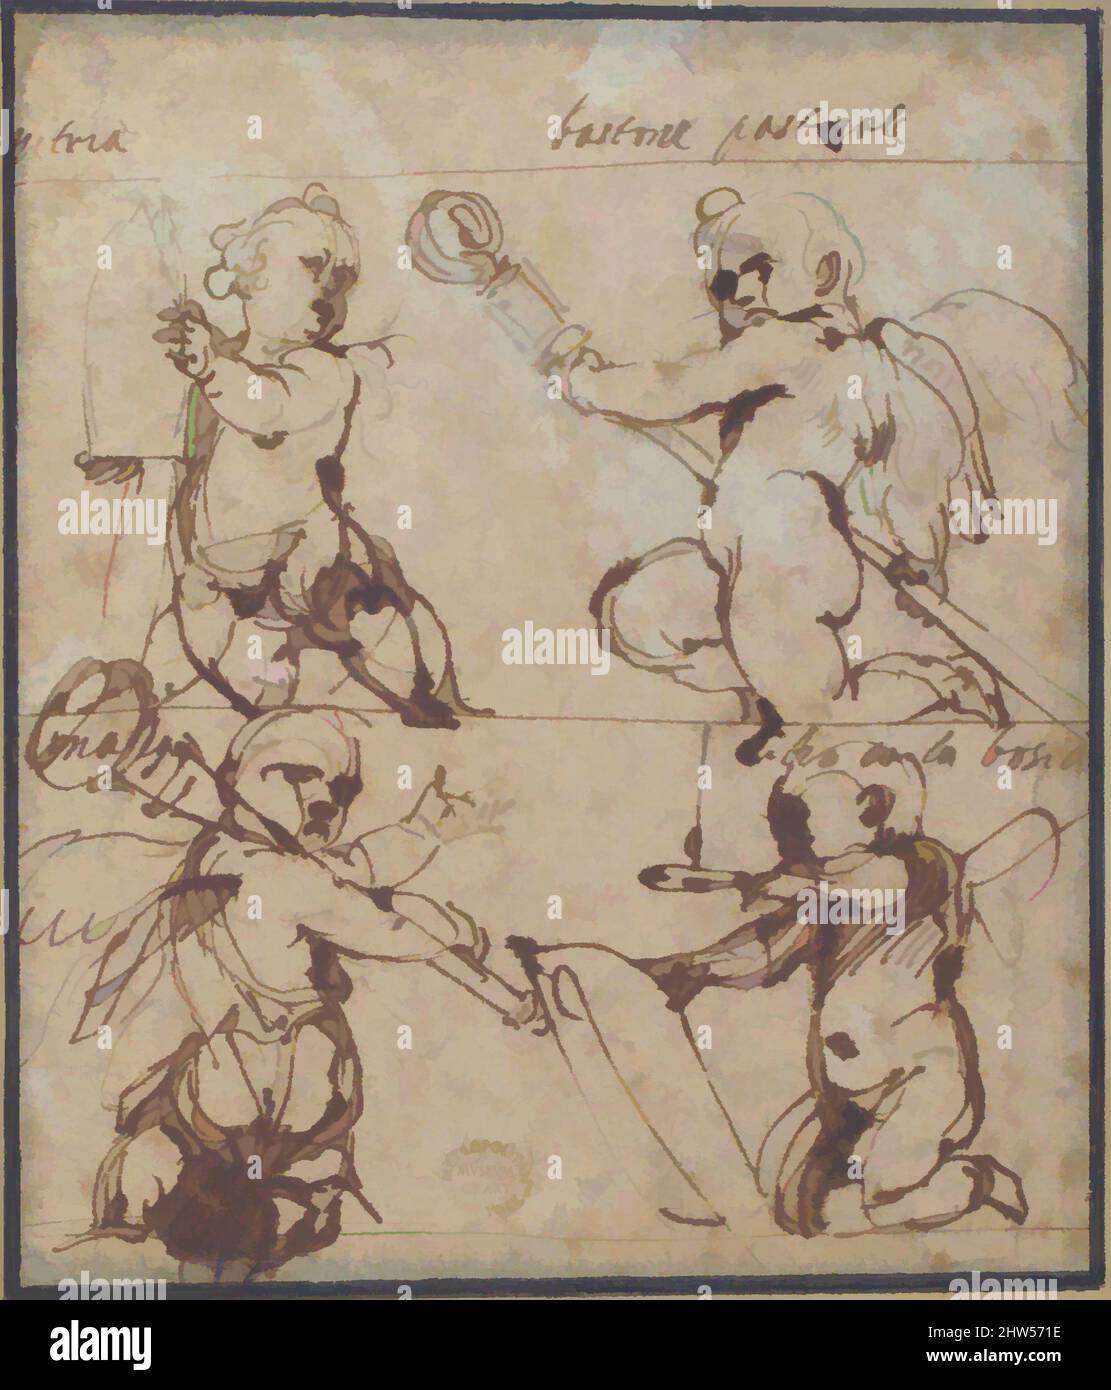 Art inspired by Putti with a Mitre, Crosier Mace, Book, and Candle, 1597–1630, Pen and brown ink on faded blue paper, 6-1/4 x 5-3/8 in. (15.9 x 13.6 cm), Drawings, Daniele Crespi (Italian, Busto Arsizio 1597/1600–1630 Milan, Classic works modernized by Artotop with a splash of modernity. Shapes, color and value, eye-catching visual impact on art. Emotions through freedom of artworks in a contemporary way. A timeless message pursuing a wildly creative new direction. Artists turning to the digital medium and creating the Artotop NFT Stock Photo